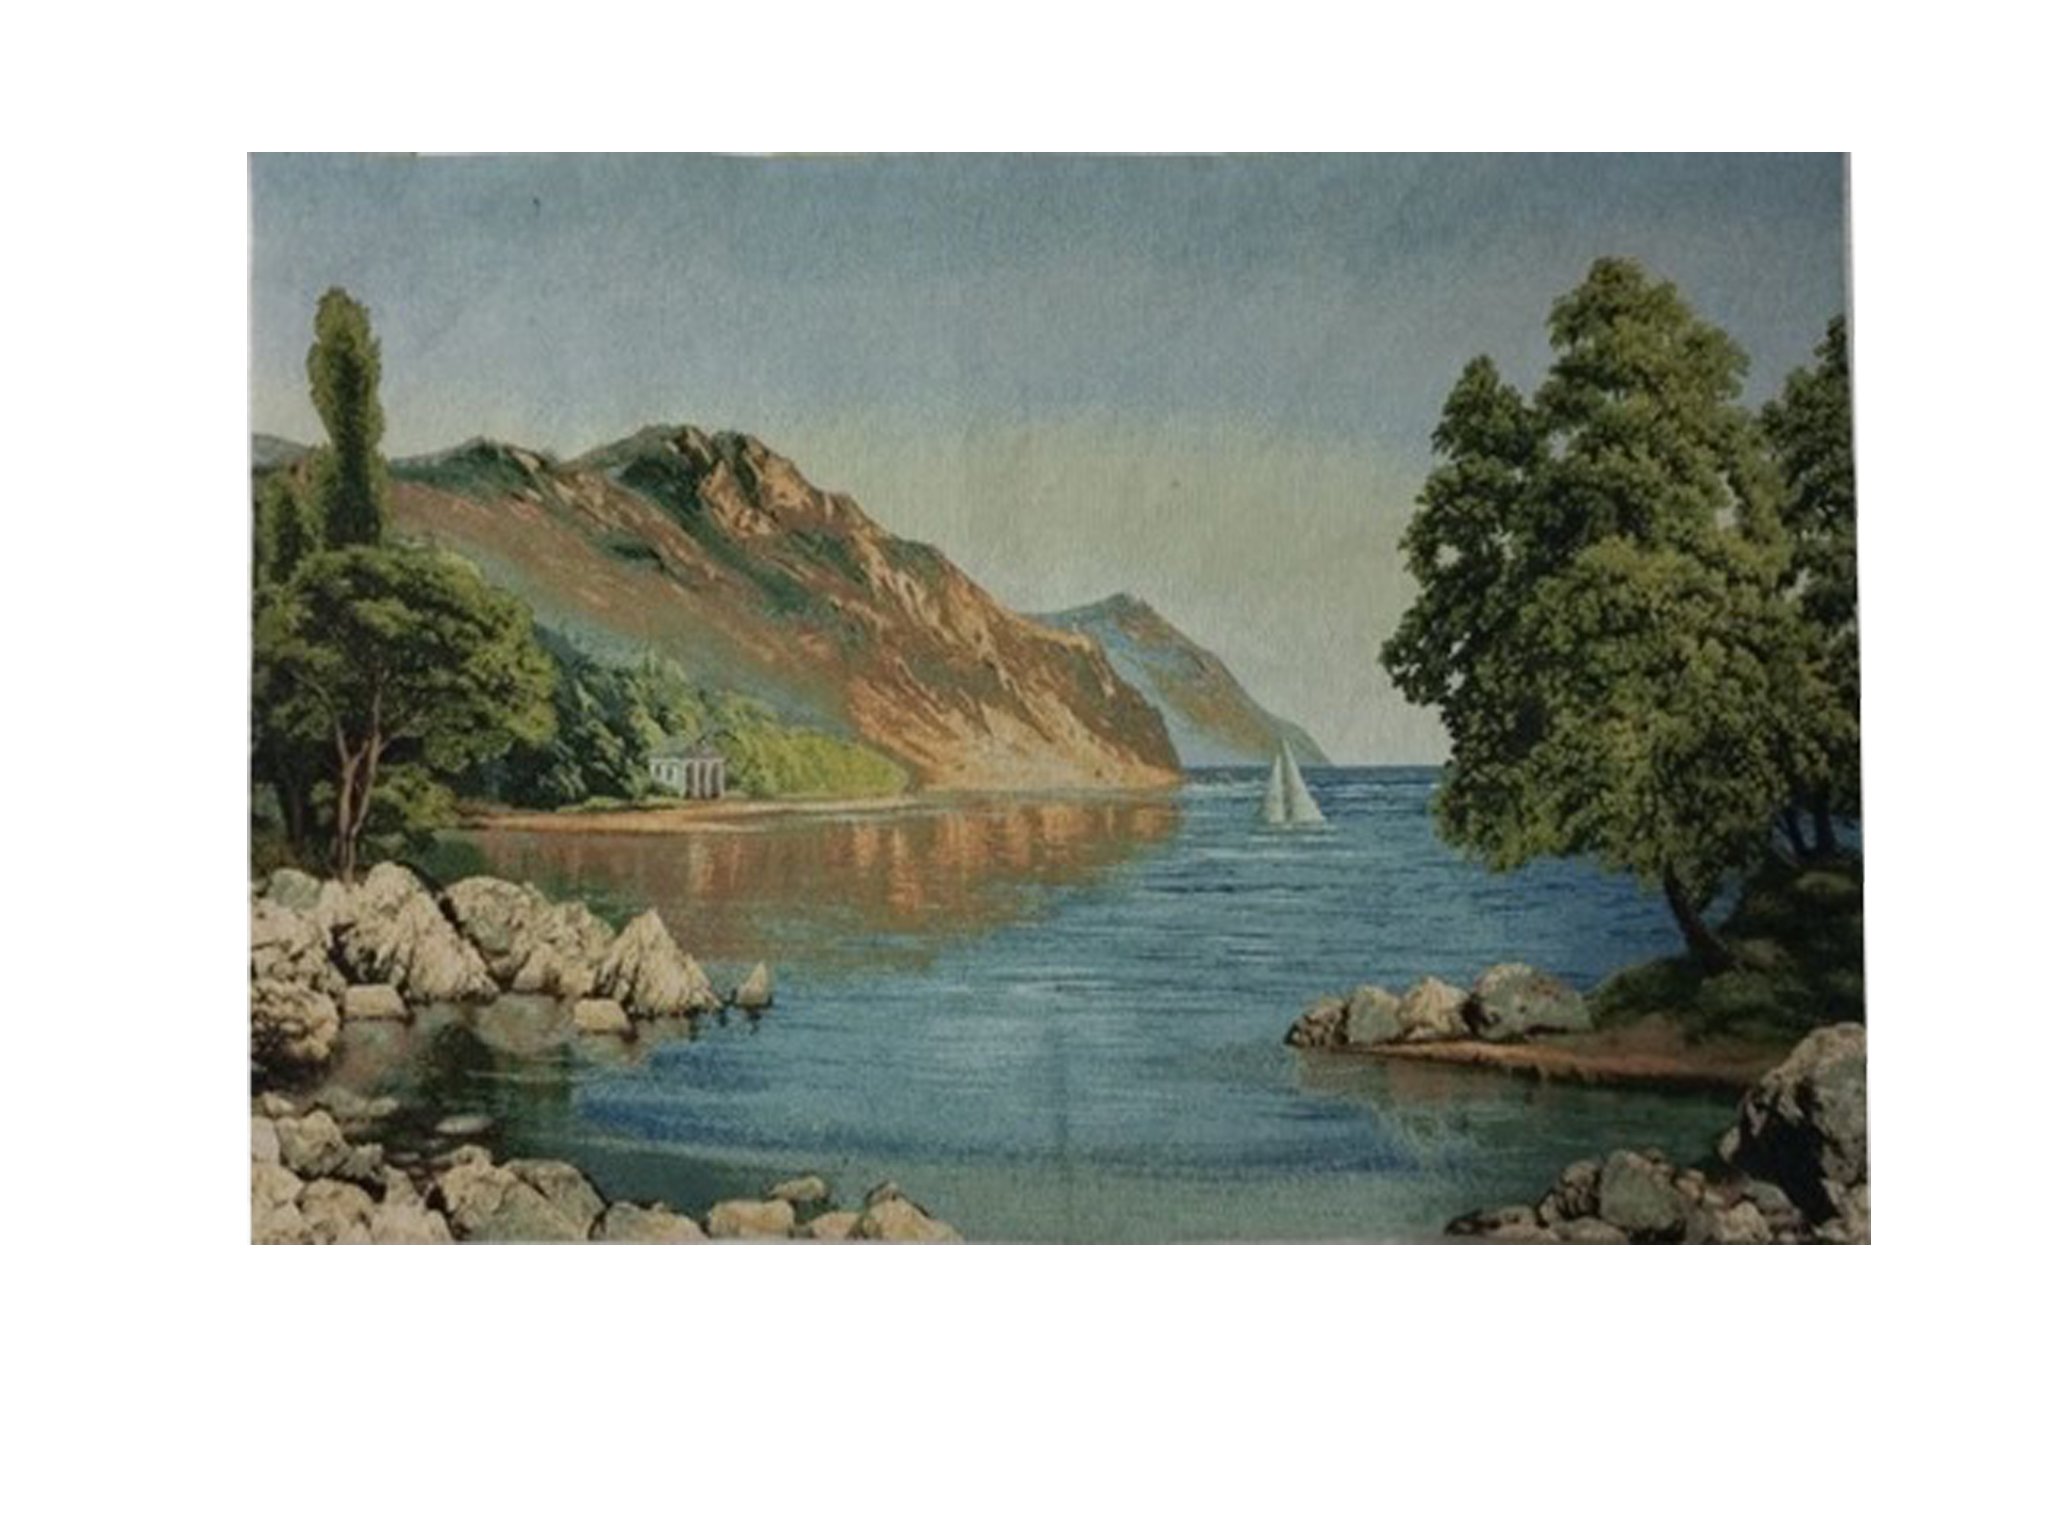 Jacquard tapestry with backing and rod insert 70cm x 110cm - European lakeside vista